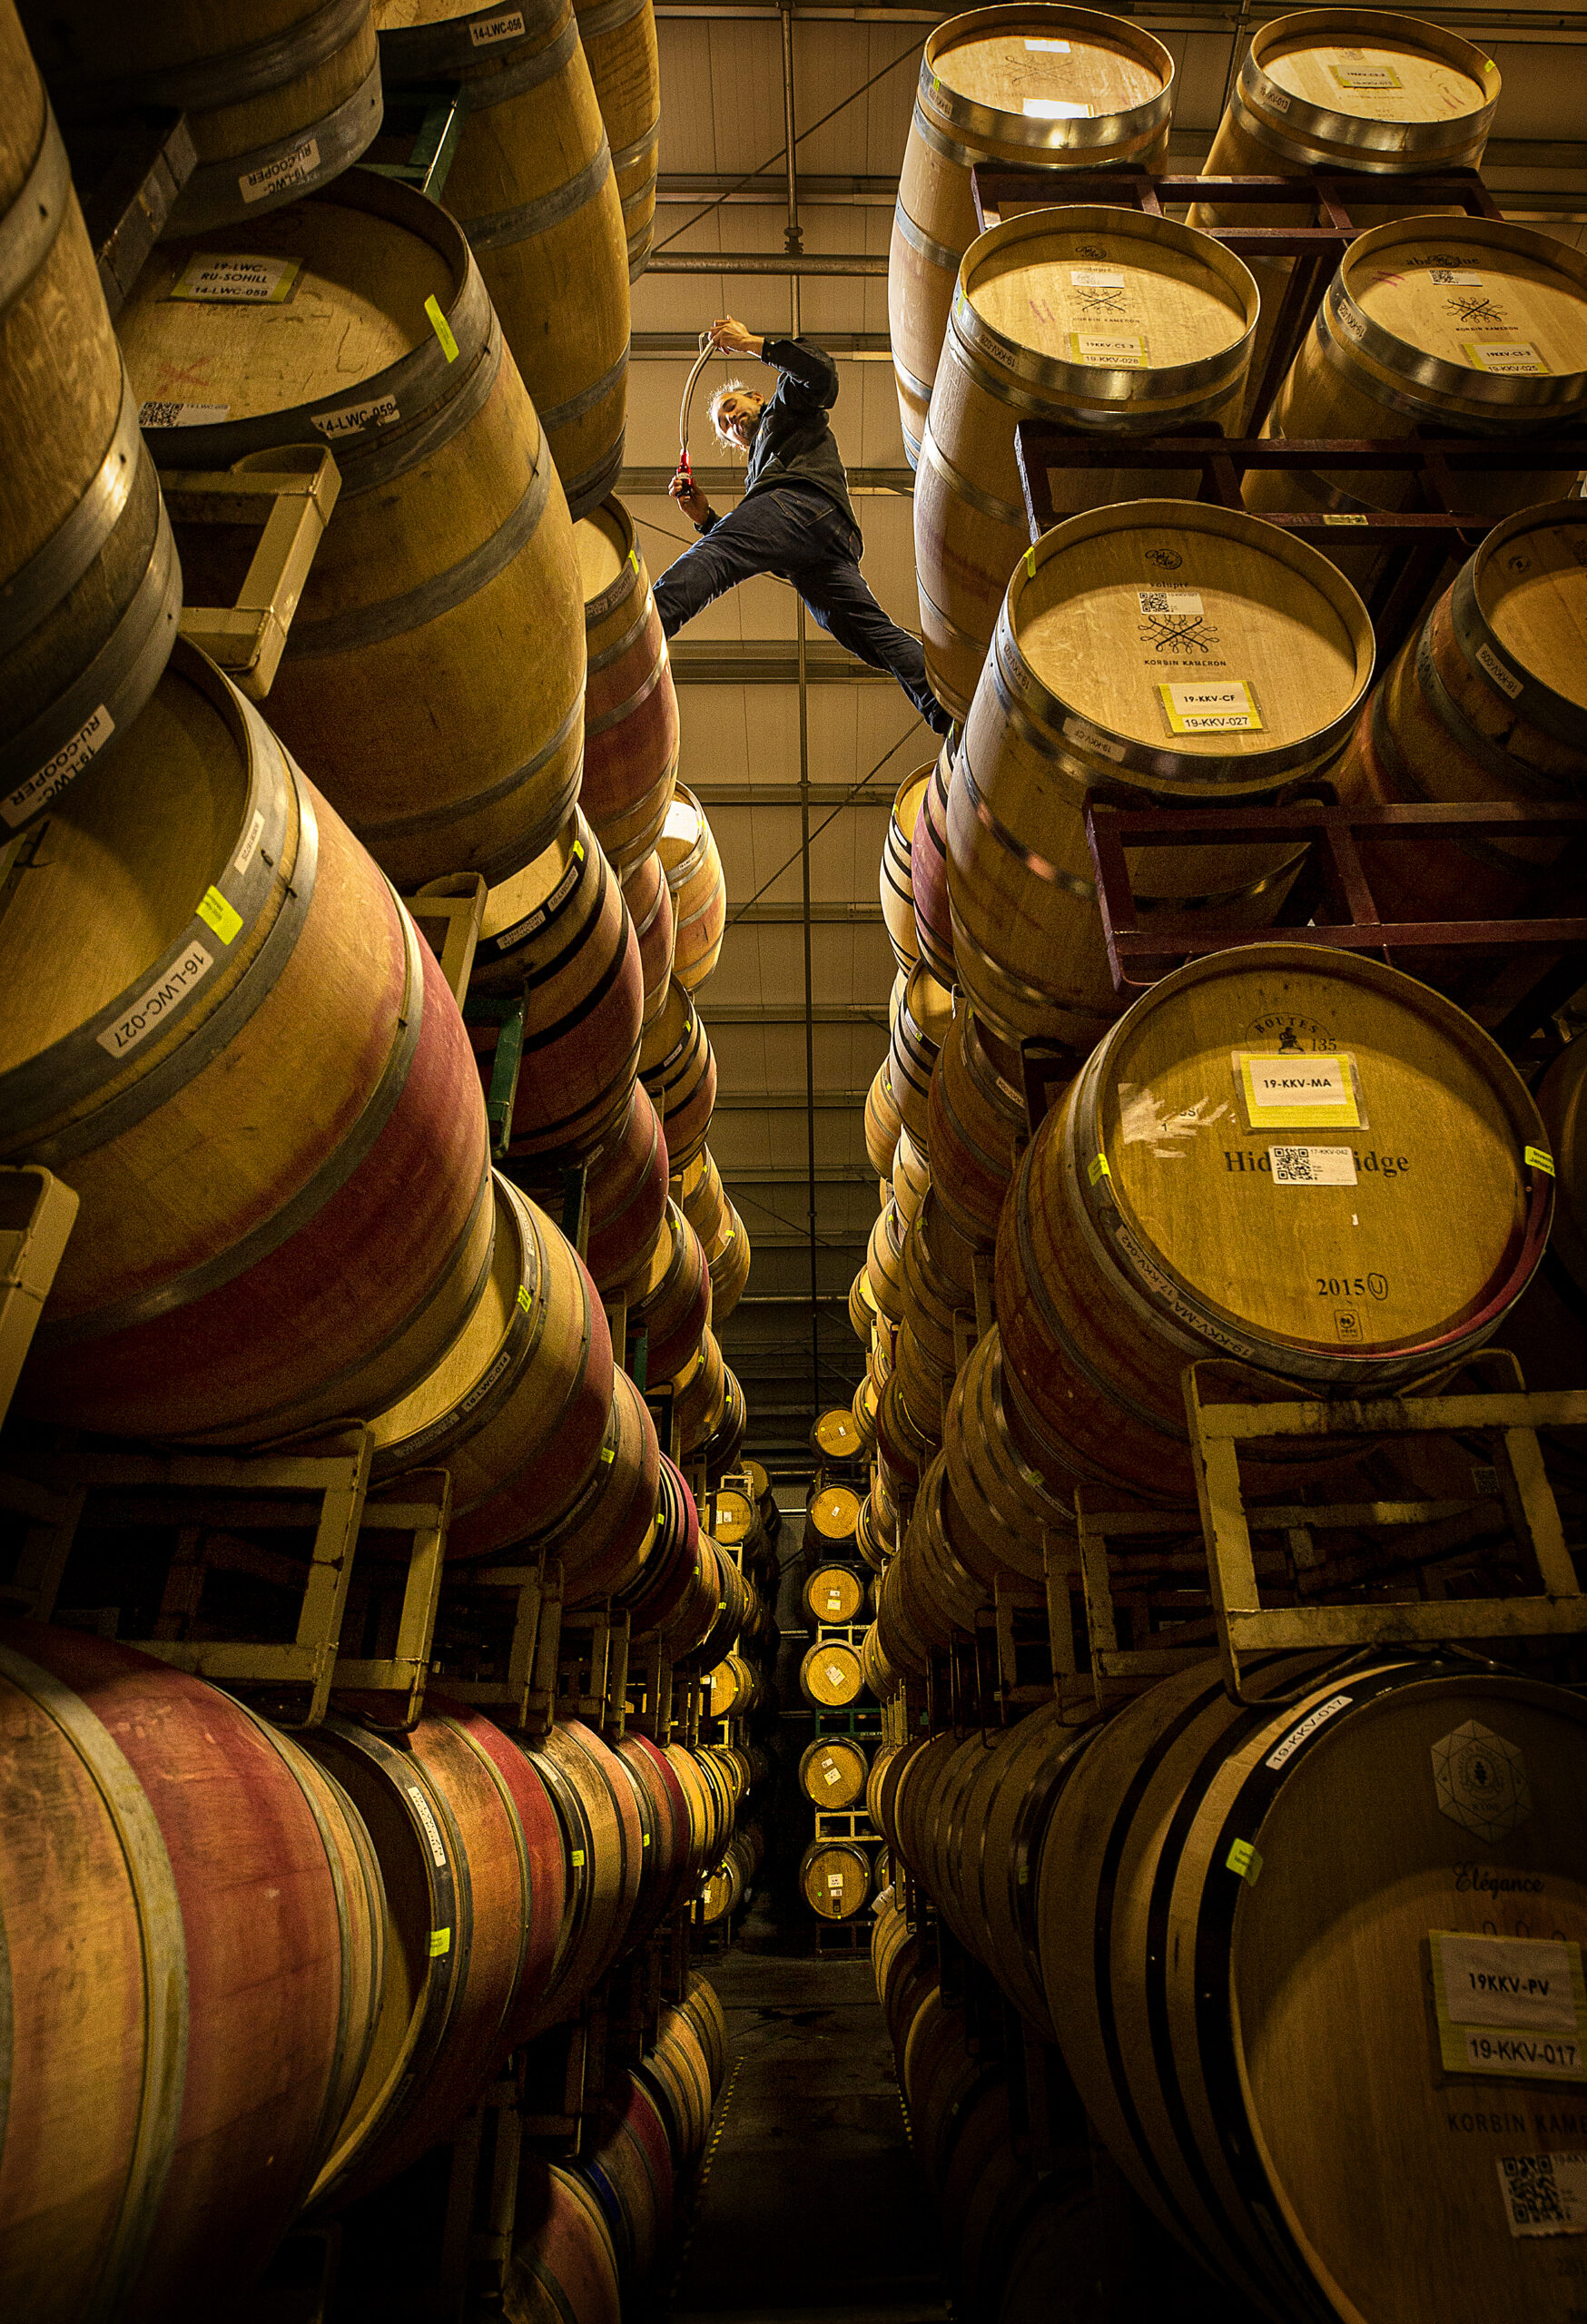 Chris Leonard, owner of the Leonard Wine Company, takes samples from 40 different barrels for blending trials at the Sugarloaf Crush facility in Oakmont. (photo by John Burgess/Sonoma Magazine)